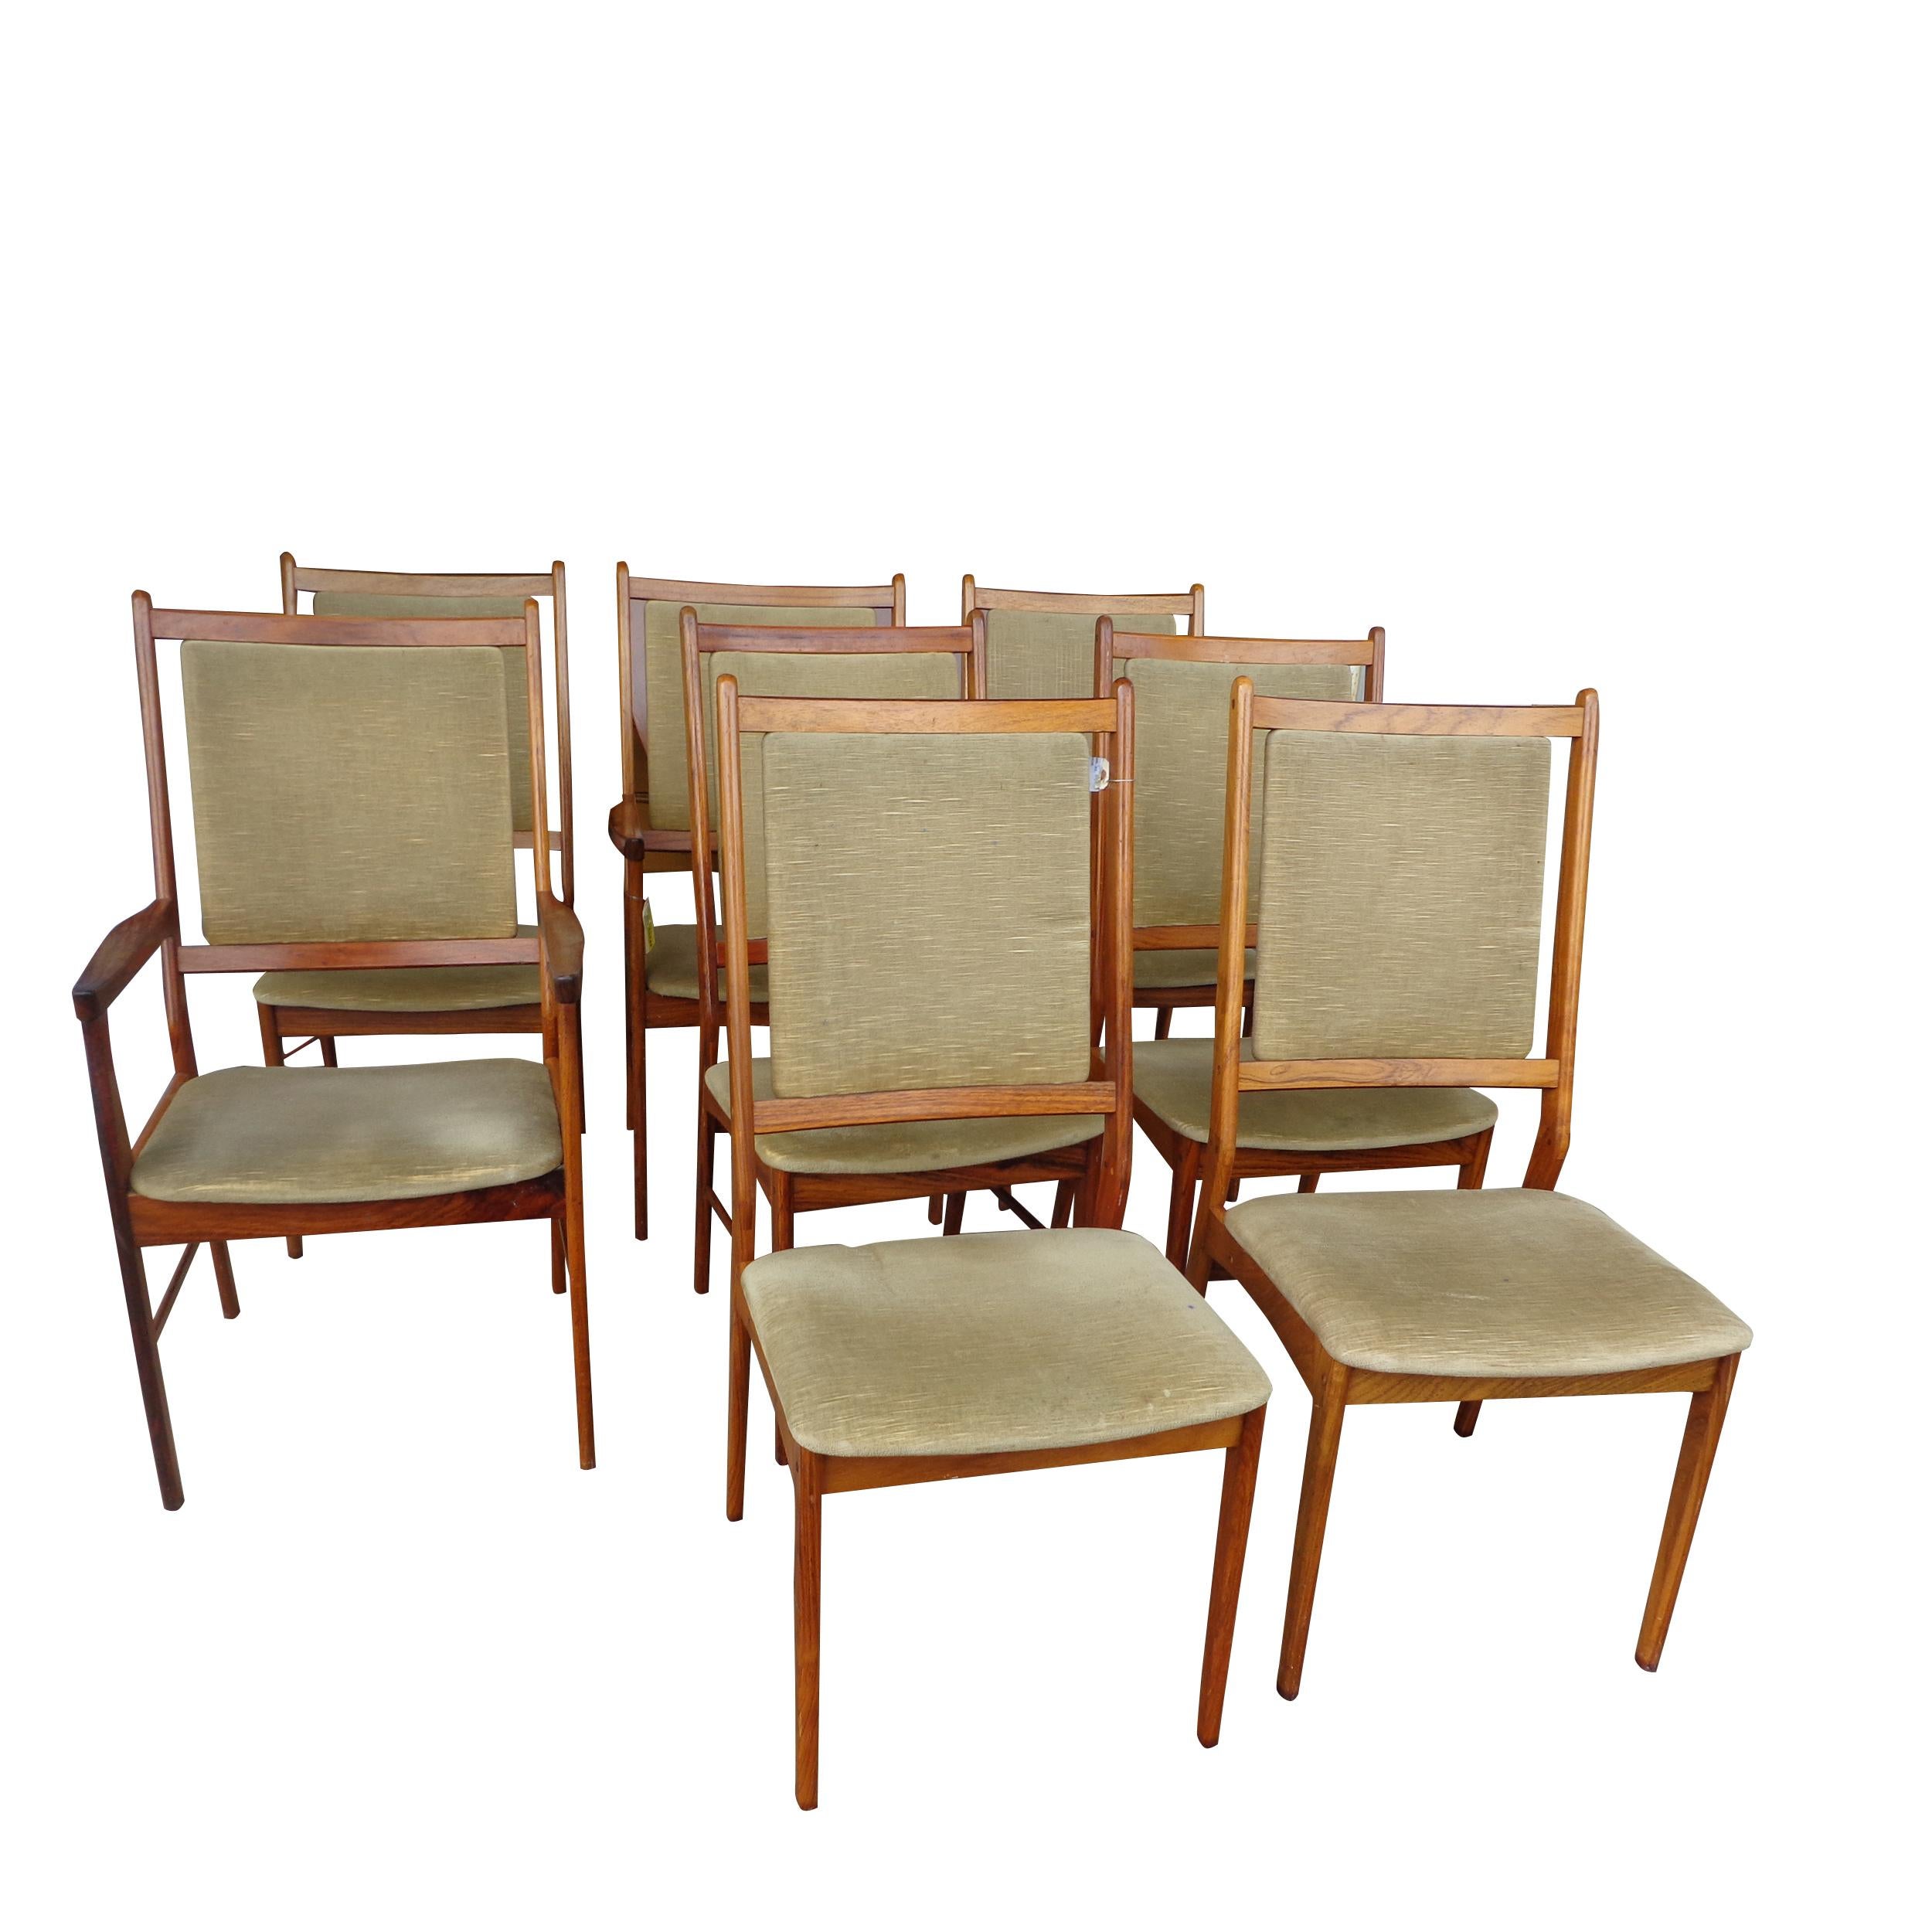 Set of 8 Danish Modern Spottrup dining chairs

Set of eight chairs manufactured in Denmark by Spottrup, during the 1960s. Each chair features a rosewood frame with a high back. 

Each Chair is stamped with Made in Denmark Spottrup. Set of two